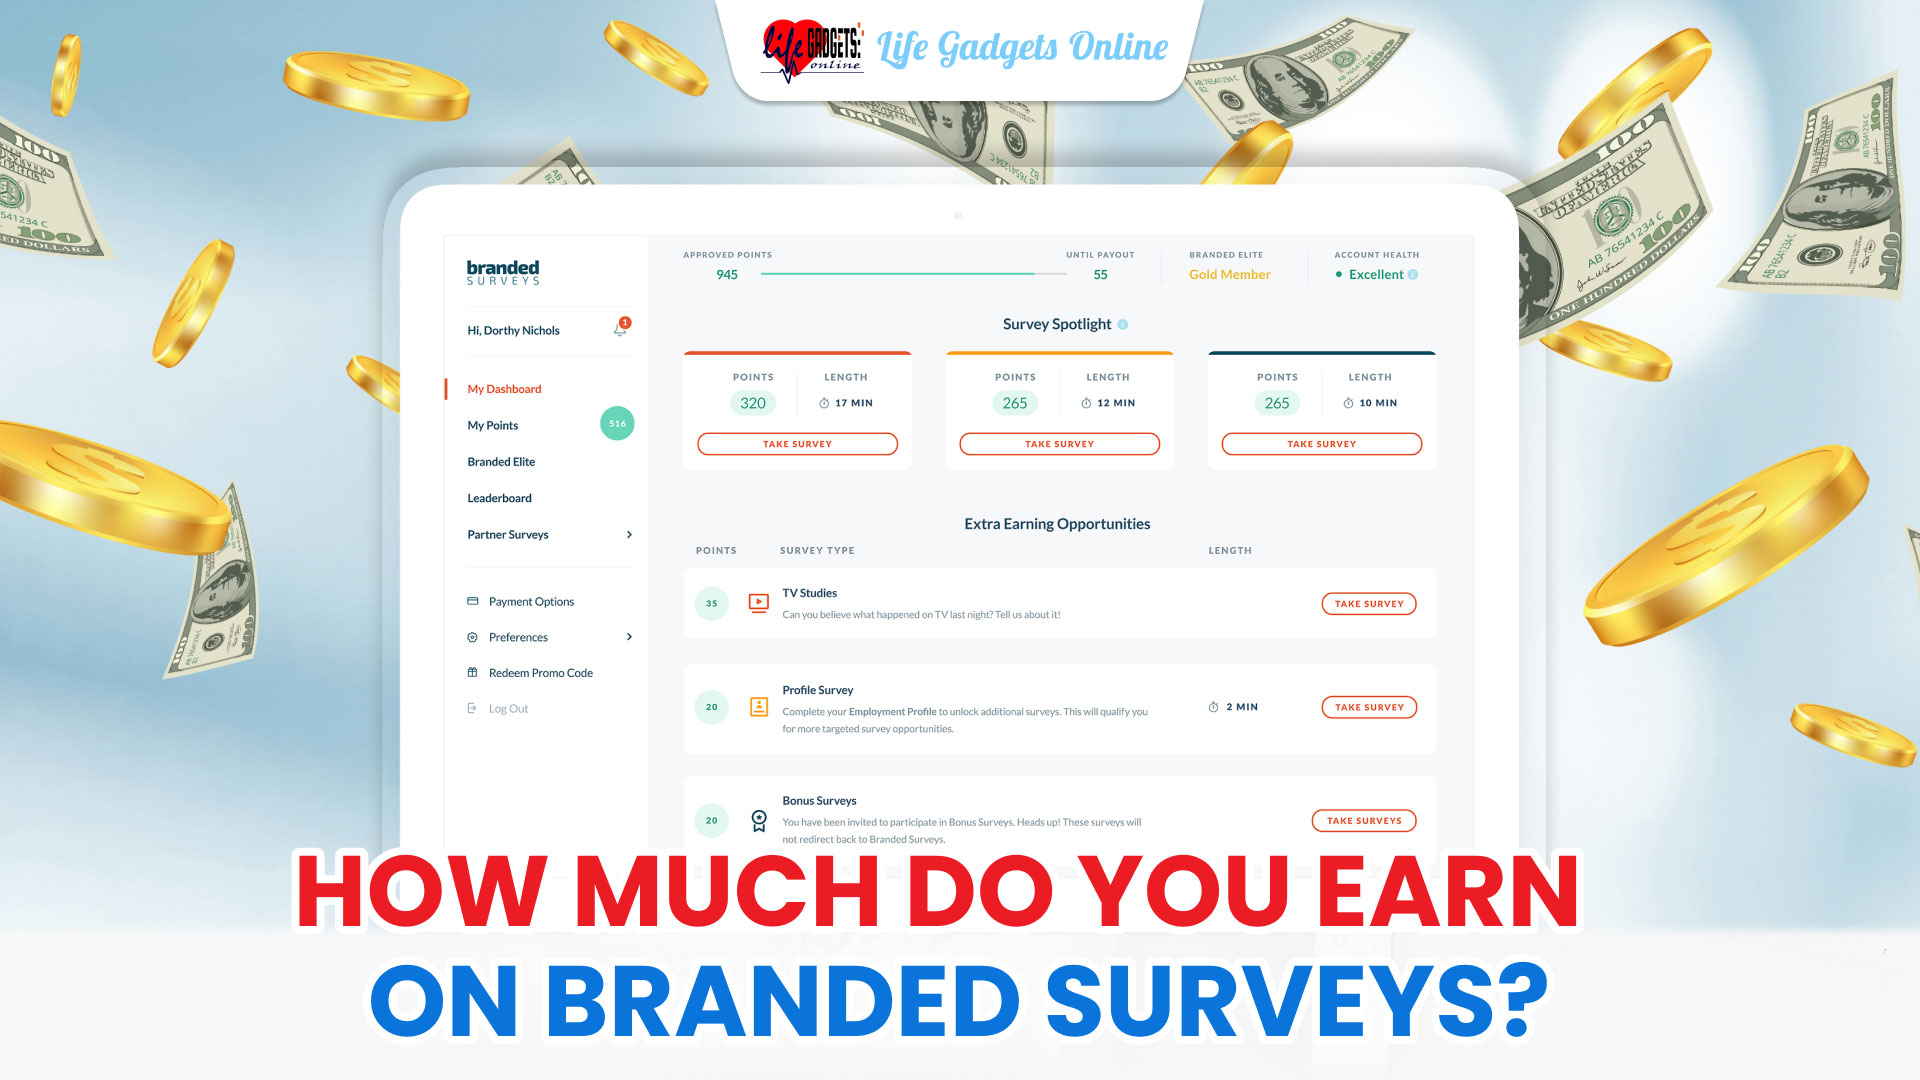 How much do you earn on Branded Surveys?